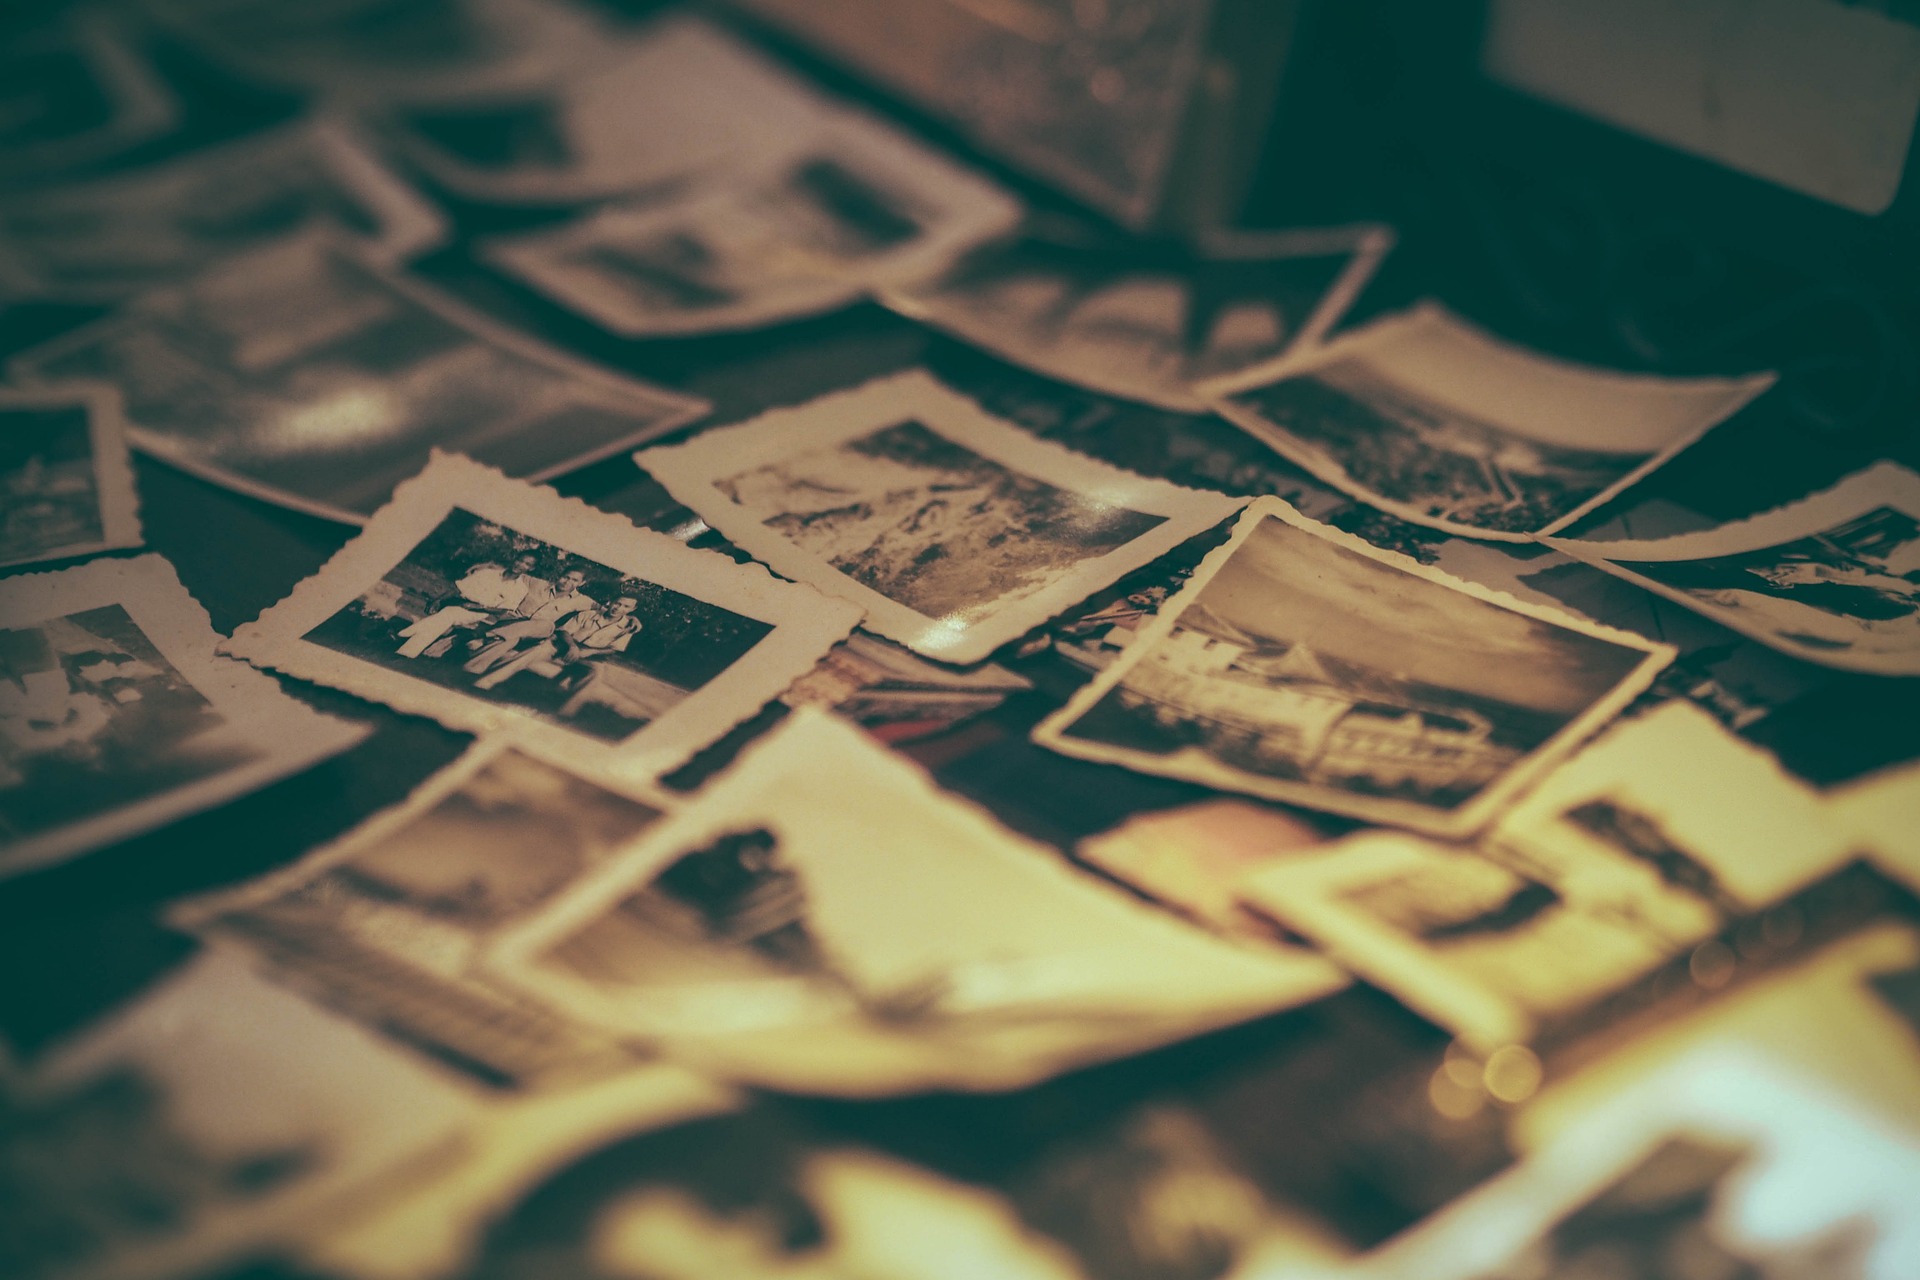 A black and white photo of an array of old black and white photographs spread out on a surface.